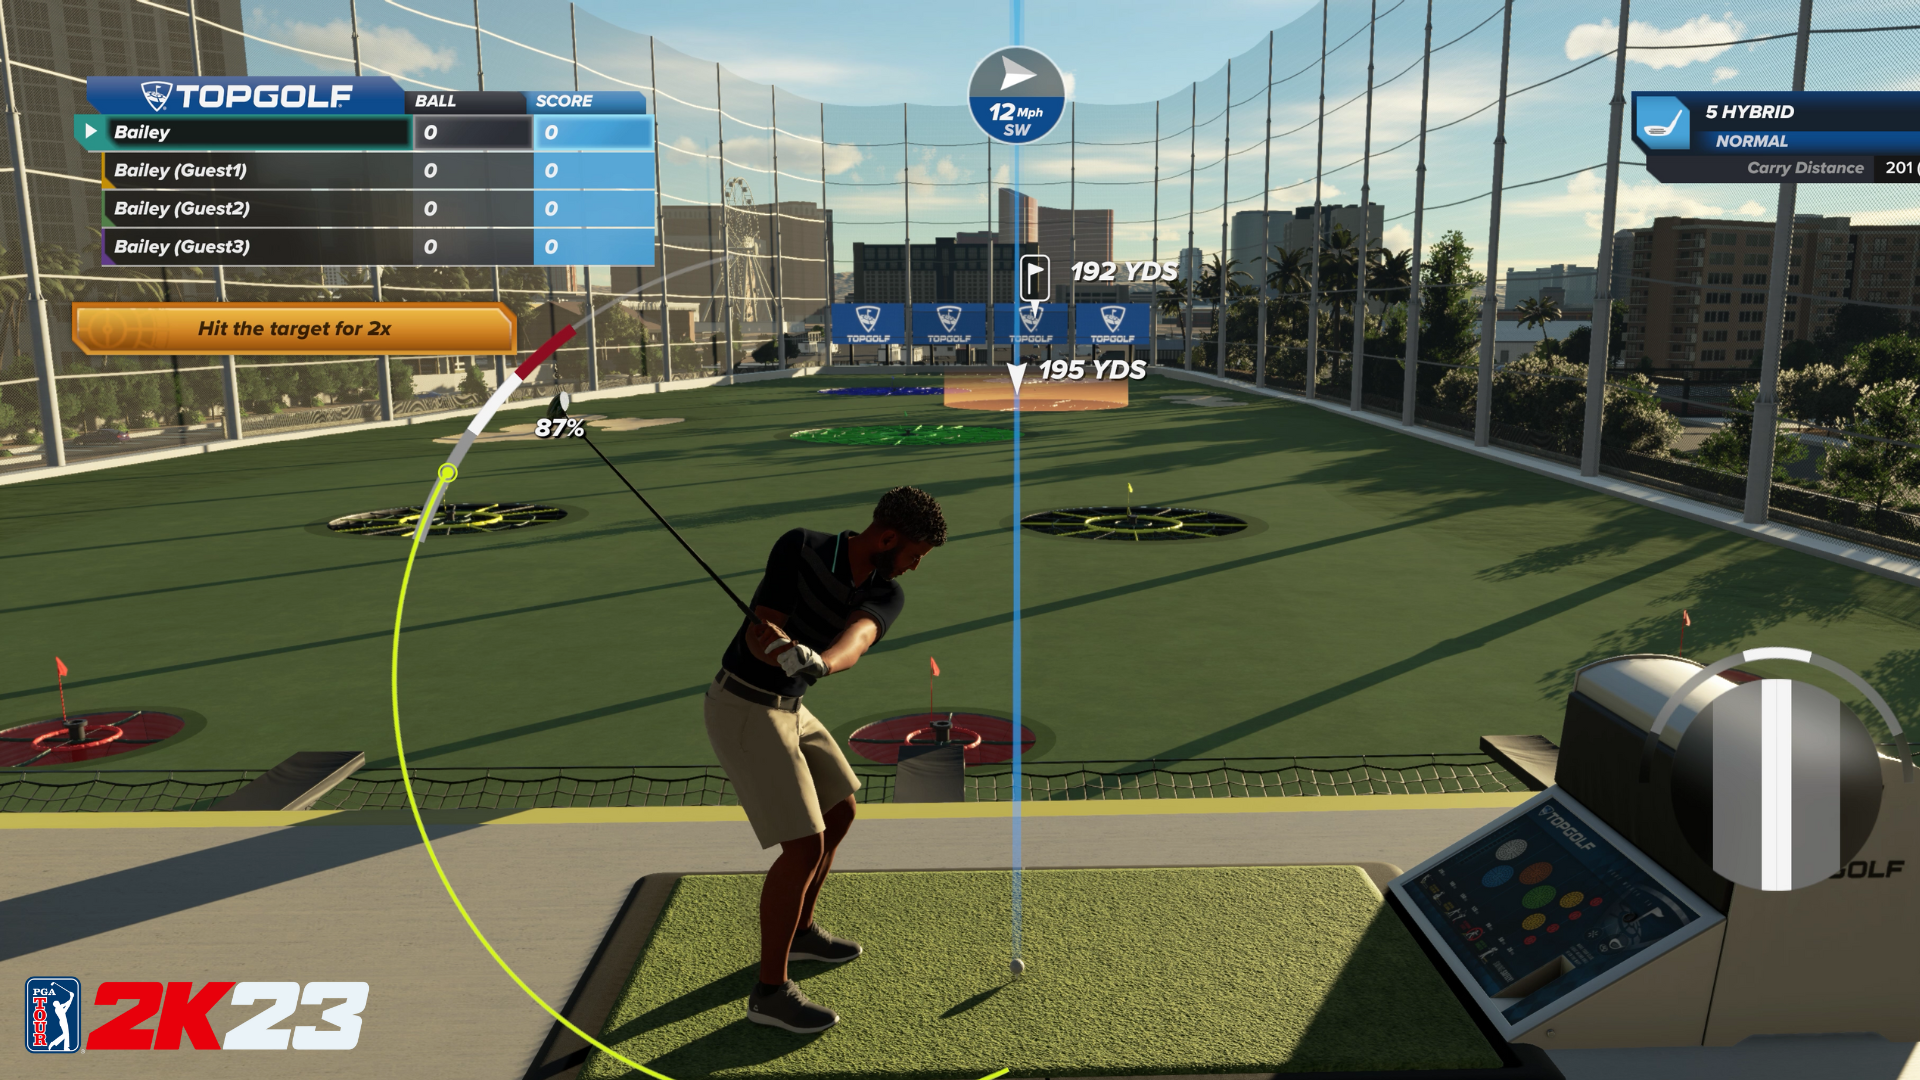 GamerCityNews pga-tour-2k23-topgolf-1.png?auto=webp&width=1920&height=1080&crop=1 'PGA Tour 2K23' Is a Must-Have for All Video Game Fans (Review) 